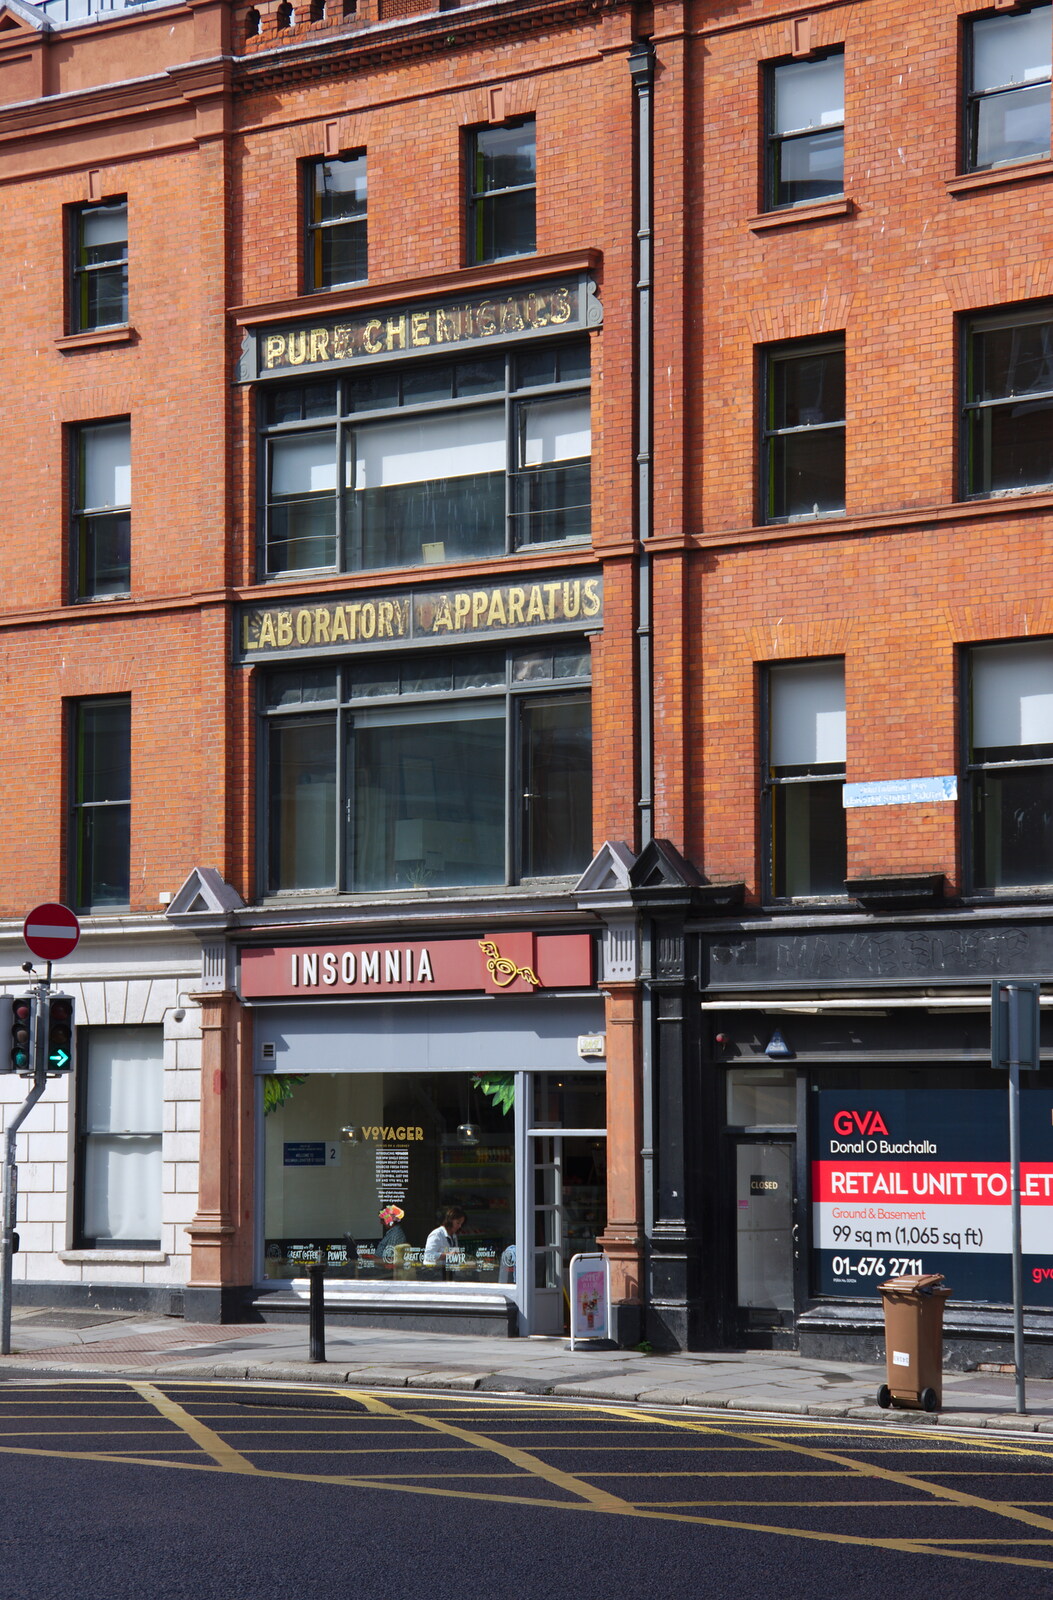 A former laboratory apparatus shop from Busking in Temple Bar, Dublin, Ireland - 12th August 2019